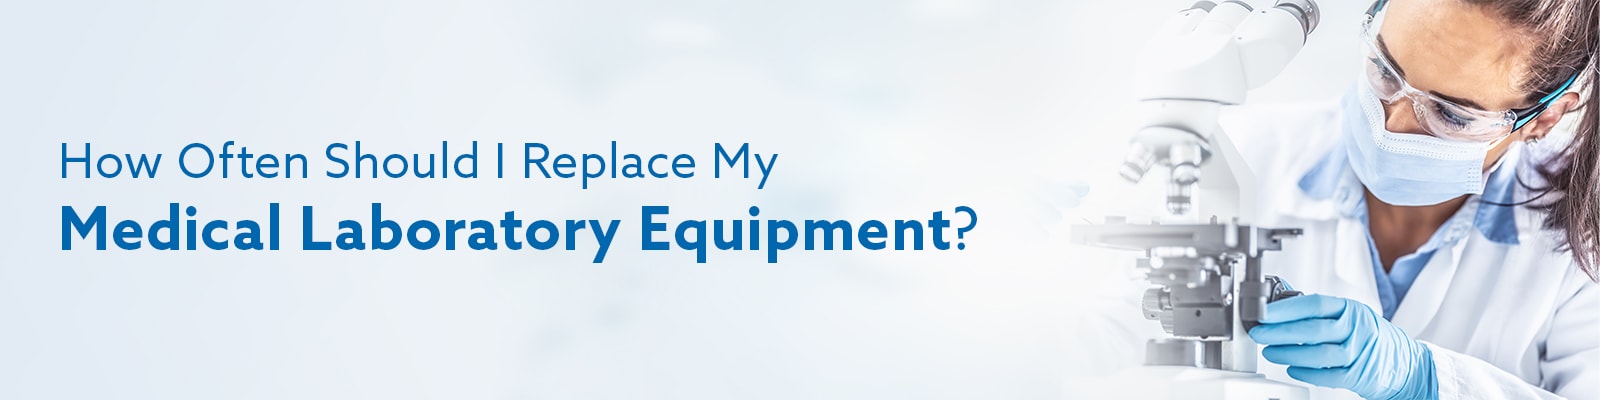 How Often Should I Replace My Medical Laboratory Equipment?